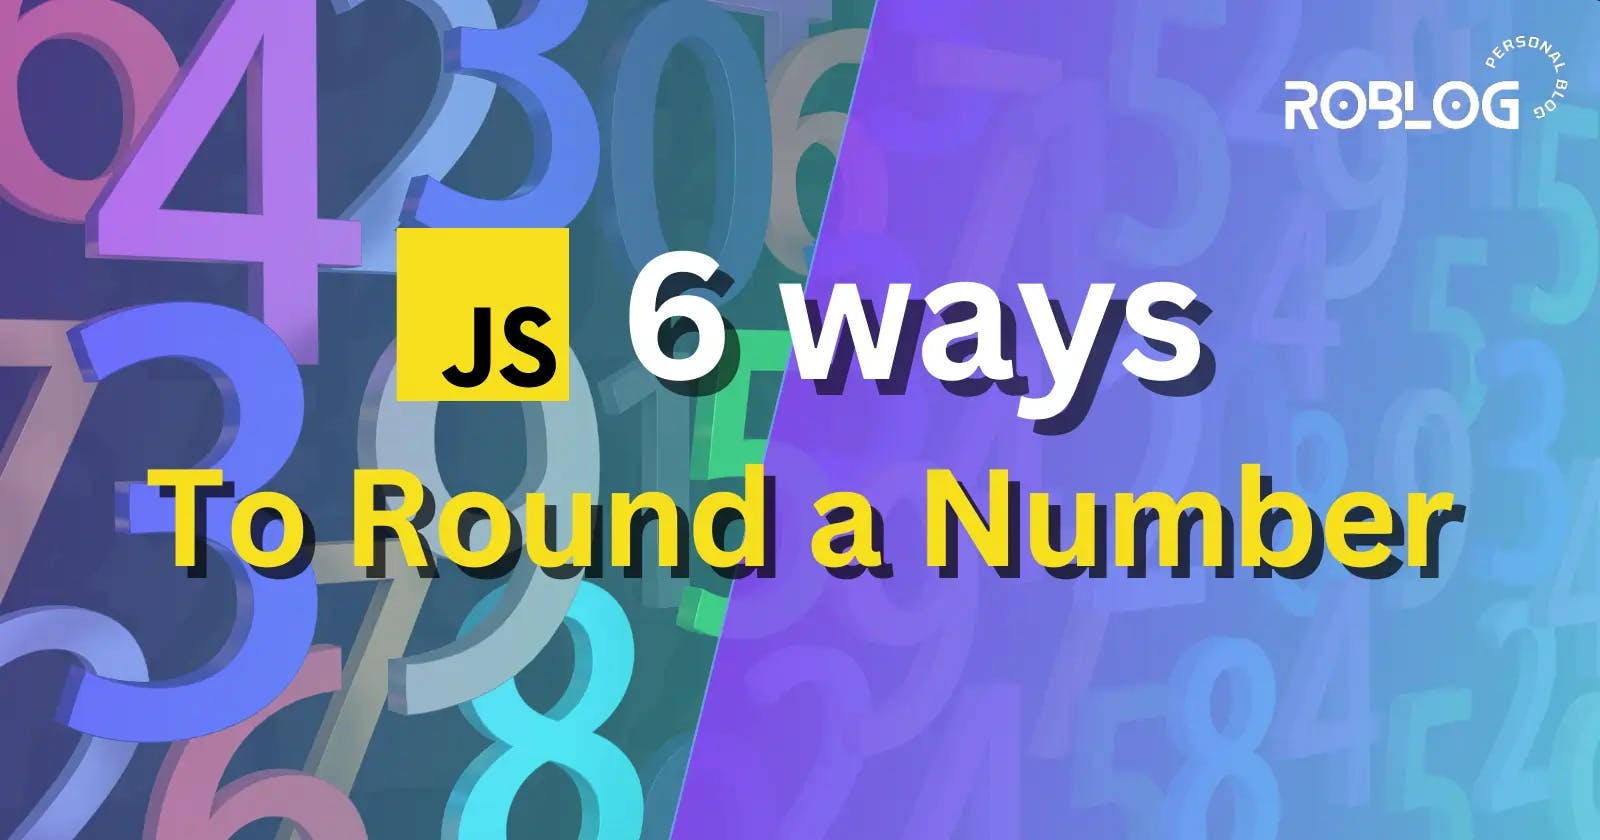 How to Round a Number to 2 Decimal Places in JavaScript